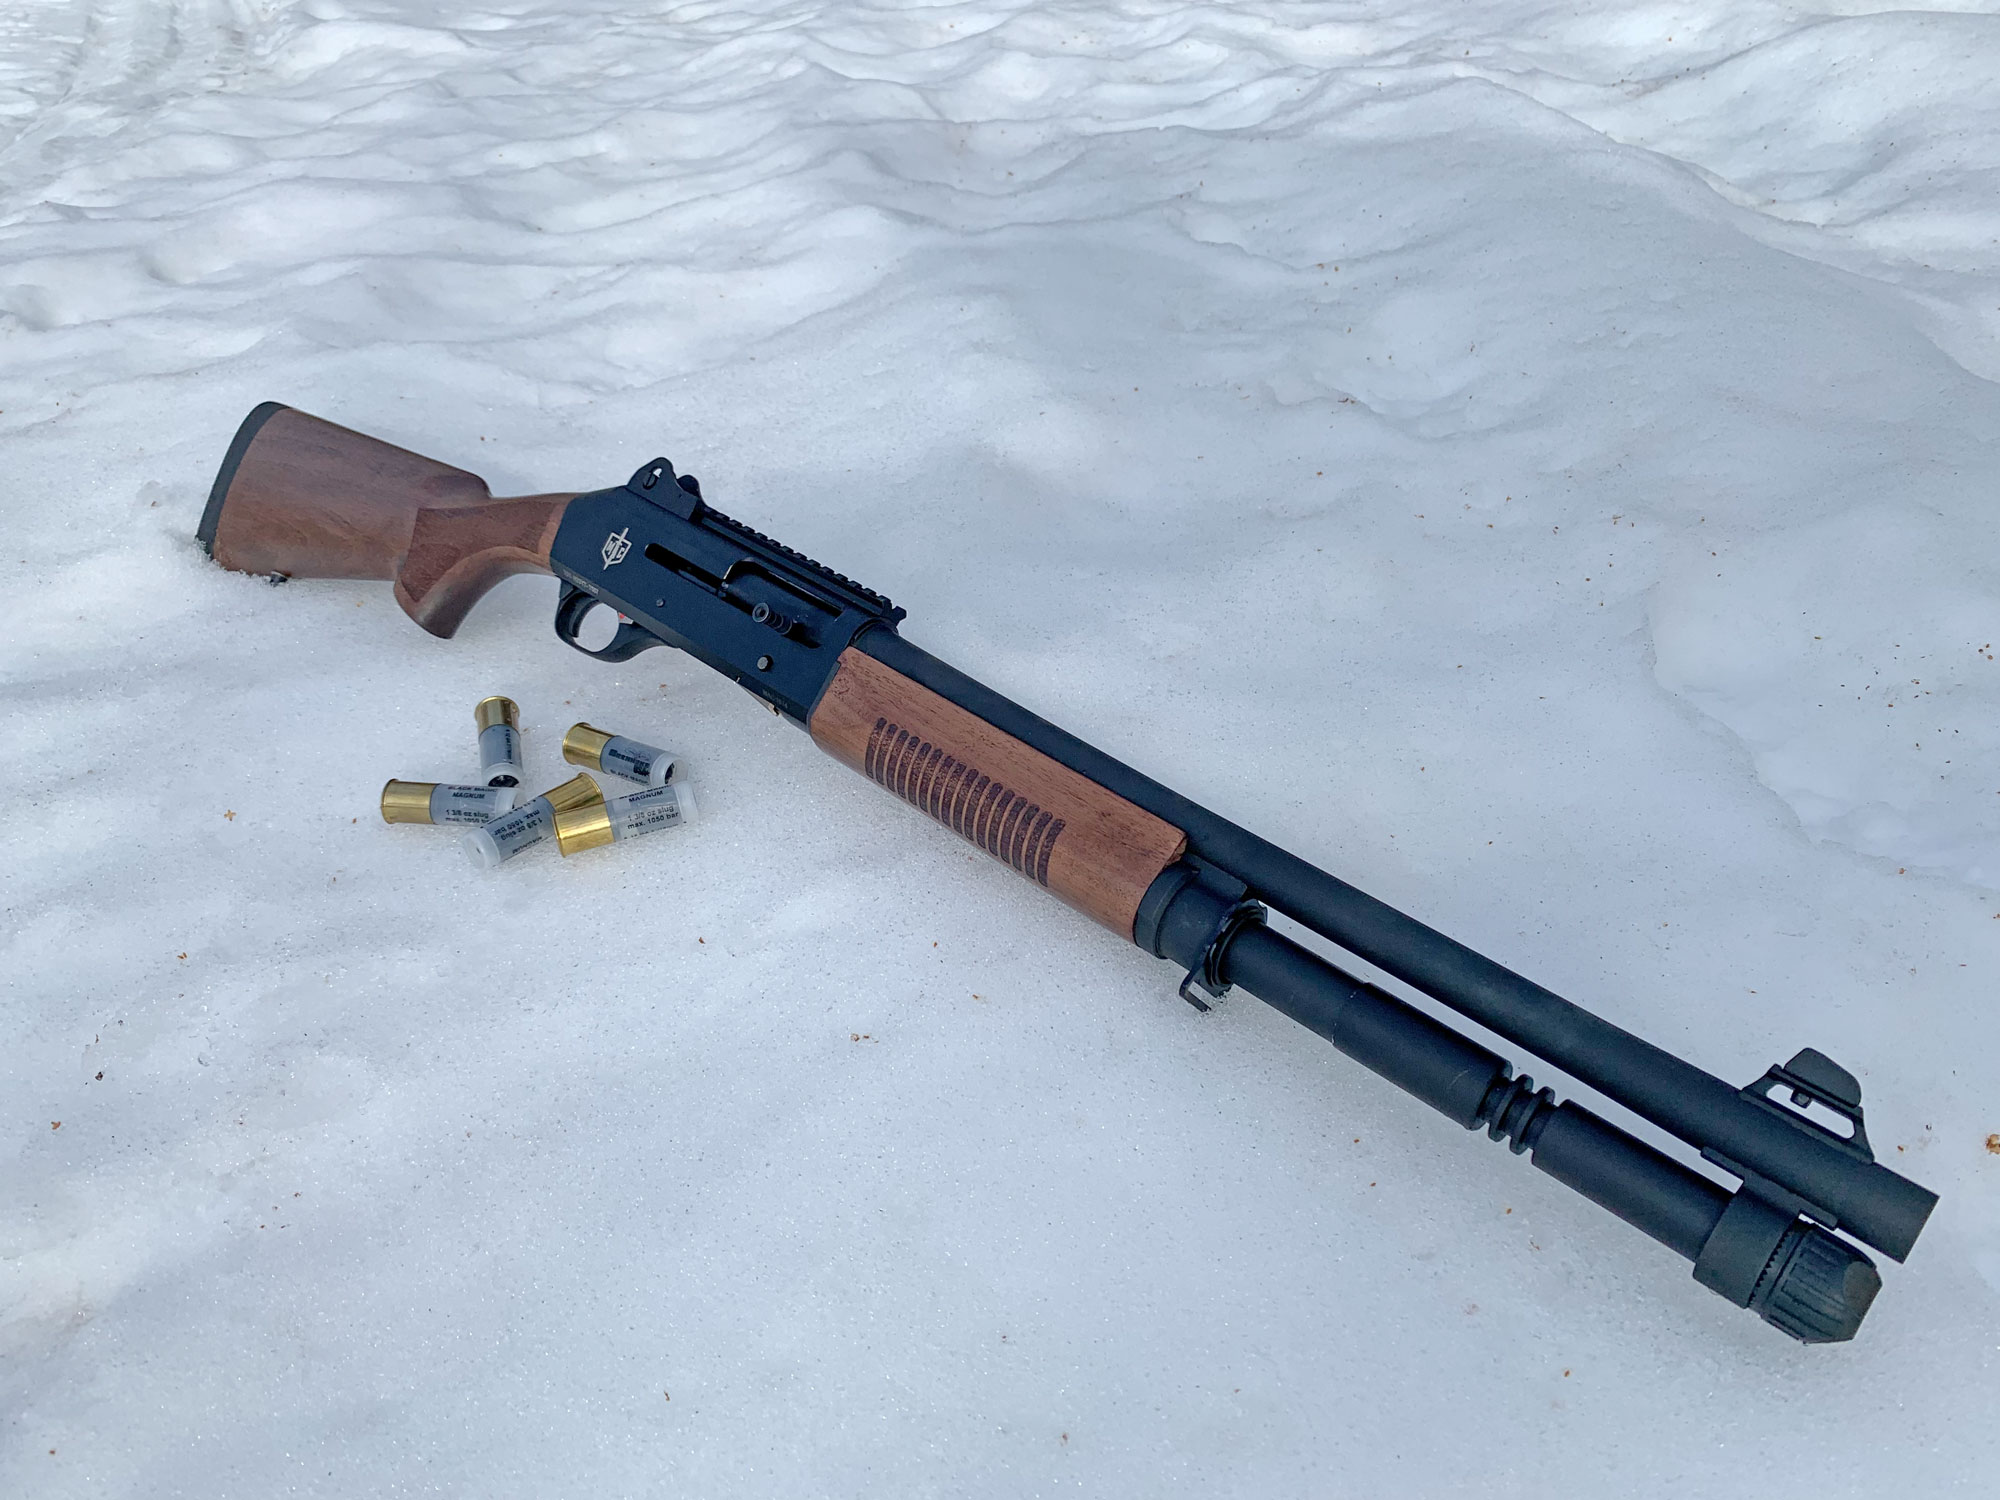 CZ 600 American Review: Return of the Wood-Stocked Hunting Rifle?